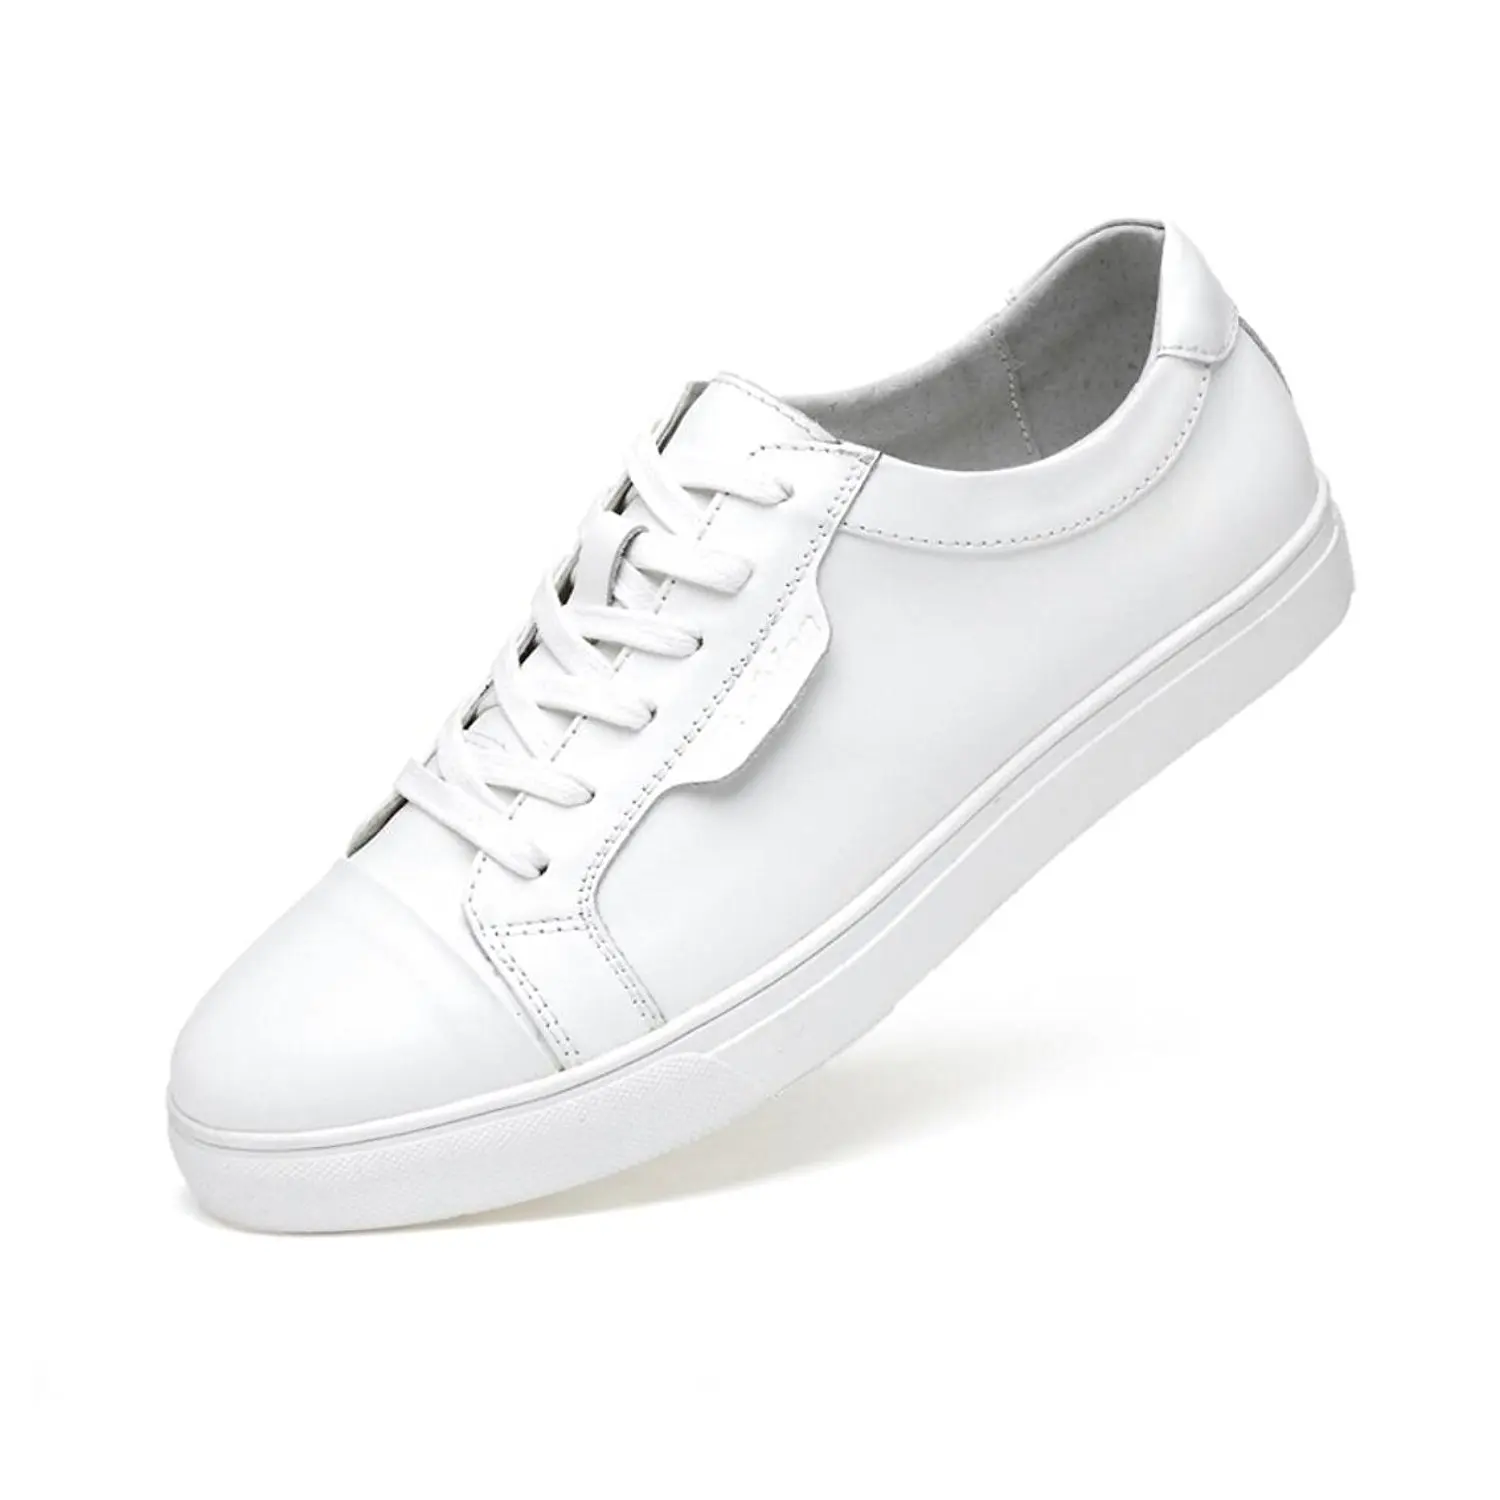 Cheap White Deck Shoes Mens, find White 